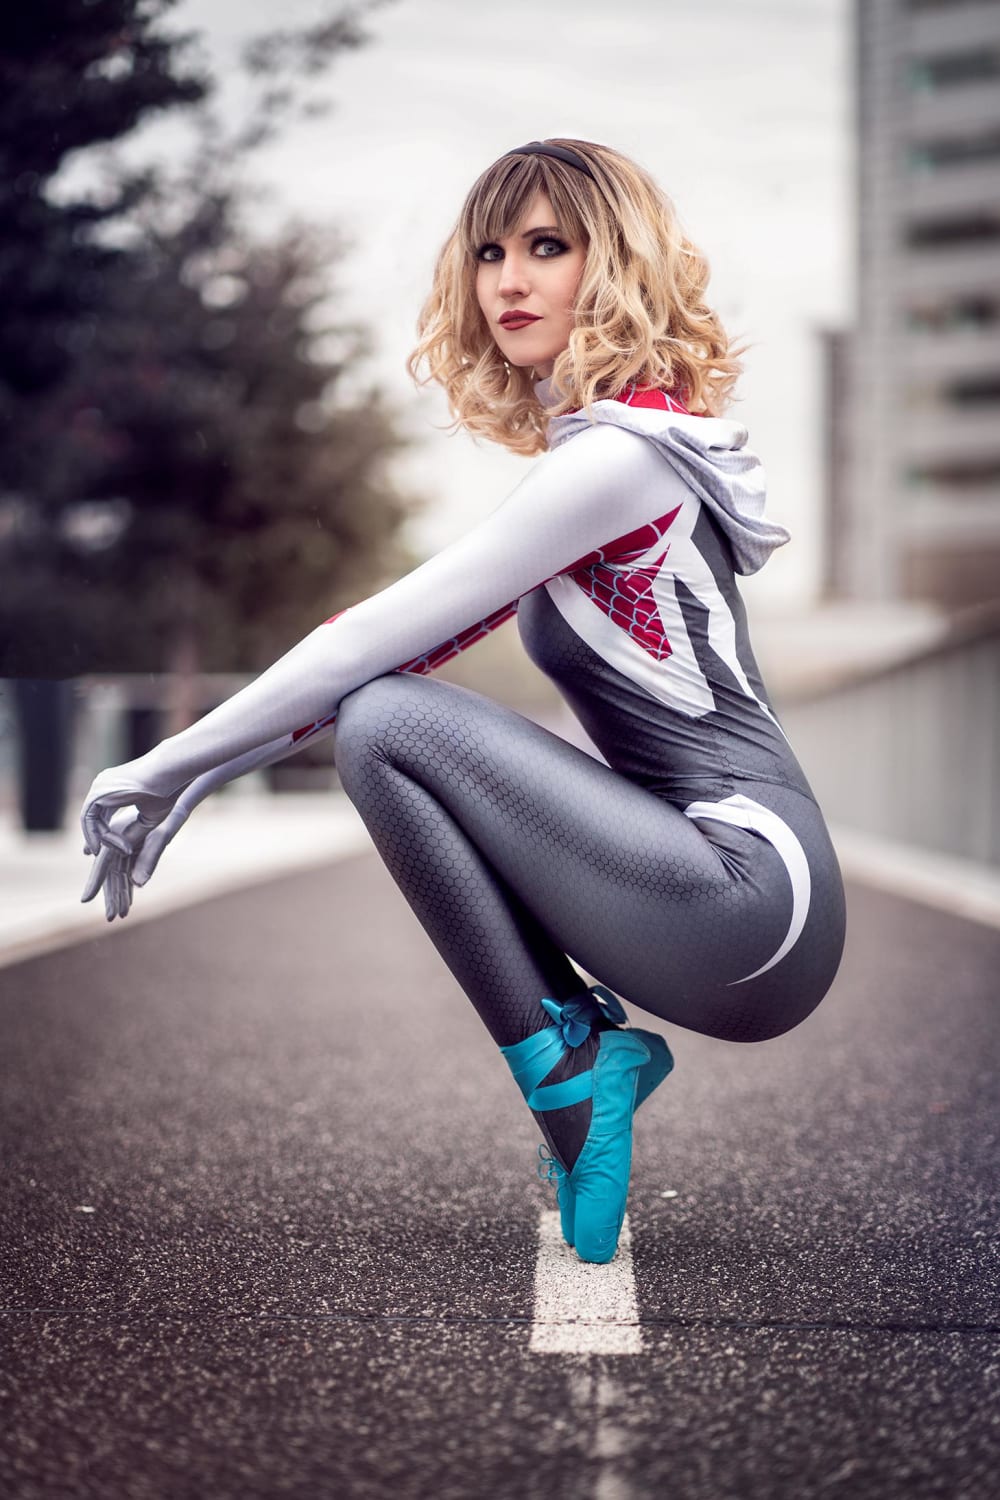 I tried to recreate this iconic pose, my first time doing a Spider Gwen cosplay (Denzhy)